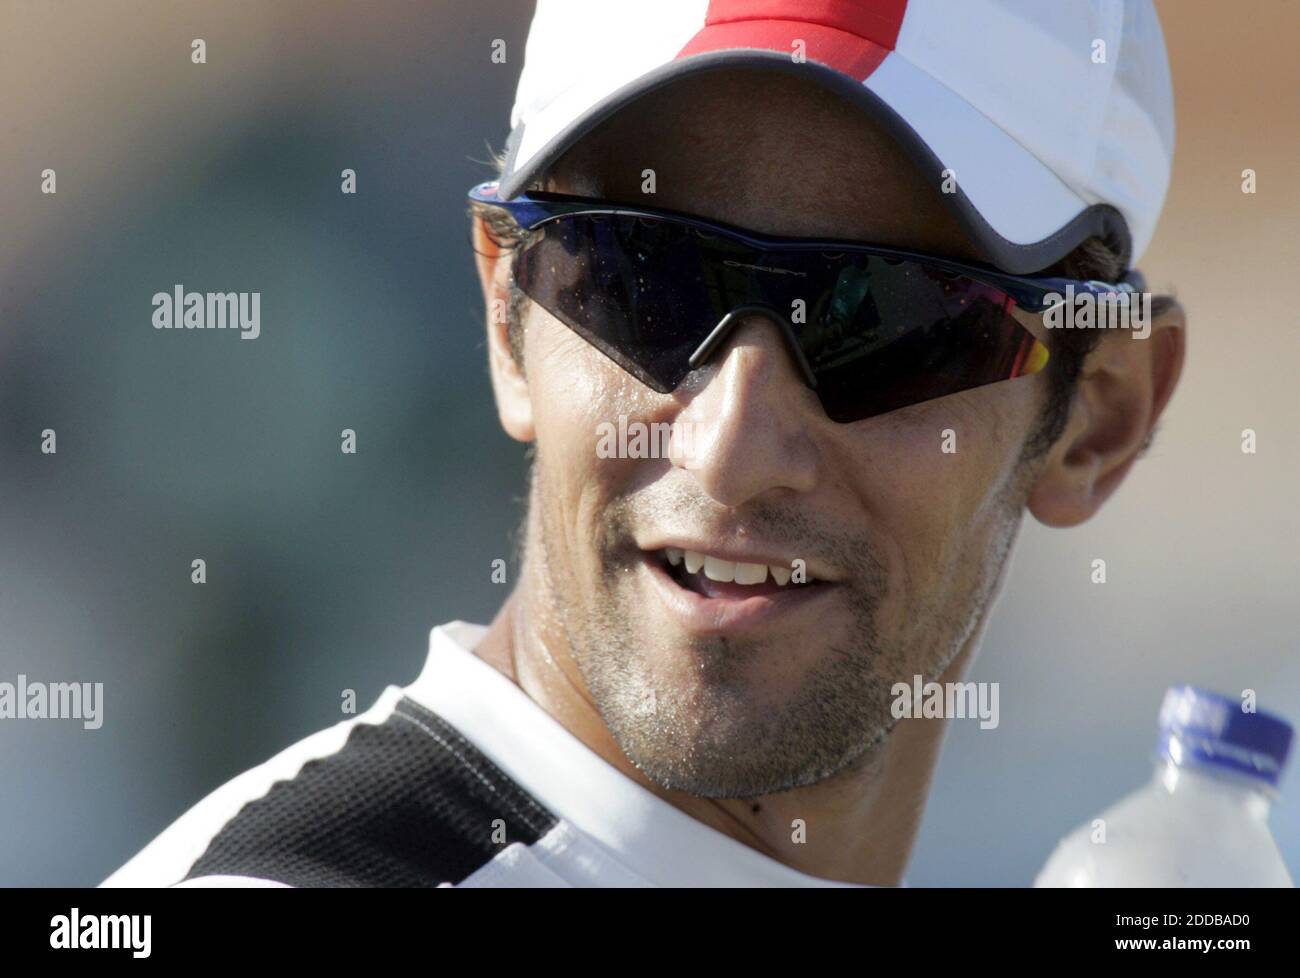 NO FILM, NO VIDEO, NO TV, NO DOCUMENTARY - USA's Rami Zur after his Men's 500 Meter single Kayak race at the Schinias Olympic Rowing and Canoeing Centre at the 2004 Olympic Games Tuesday, August 24, 2004. Photo by Nhat V. Meyer/San Jose Mercury News/KRT/ABACA Stock Photo